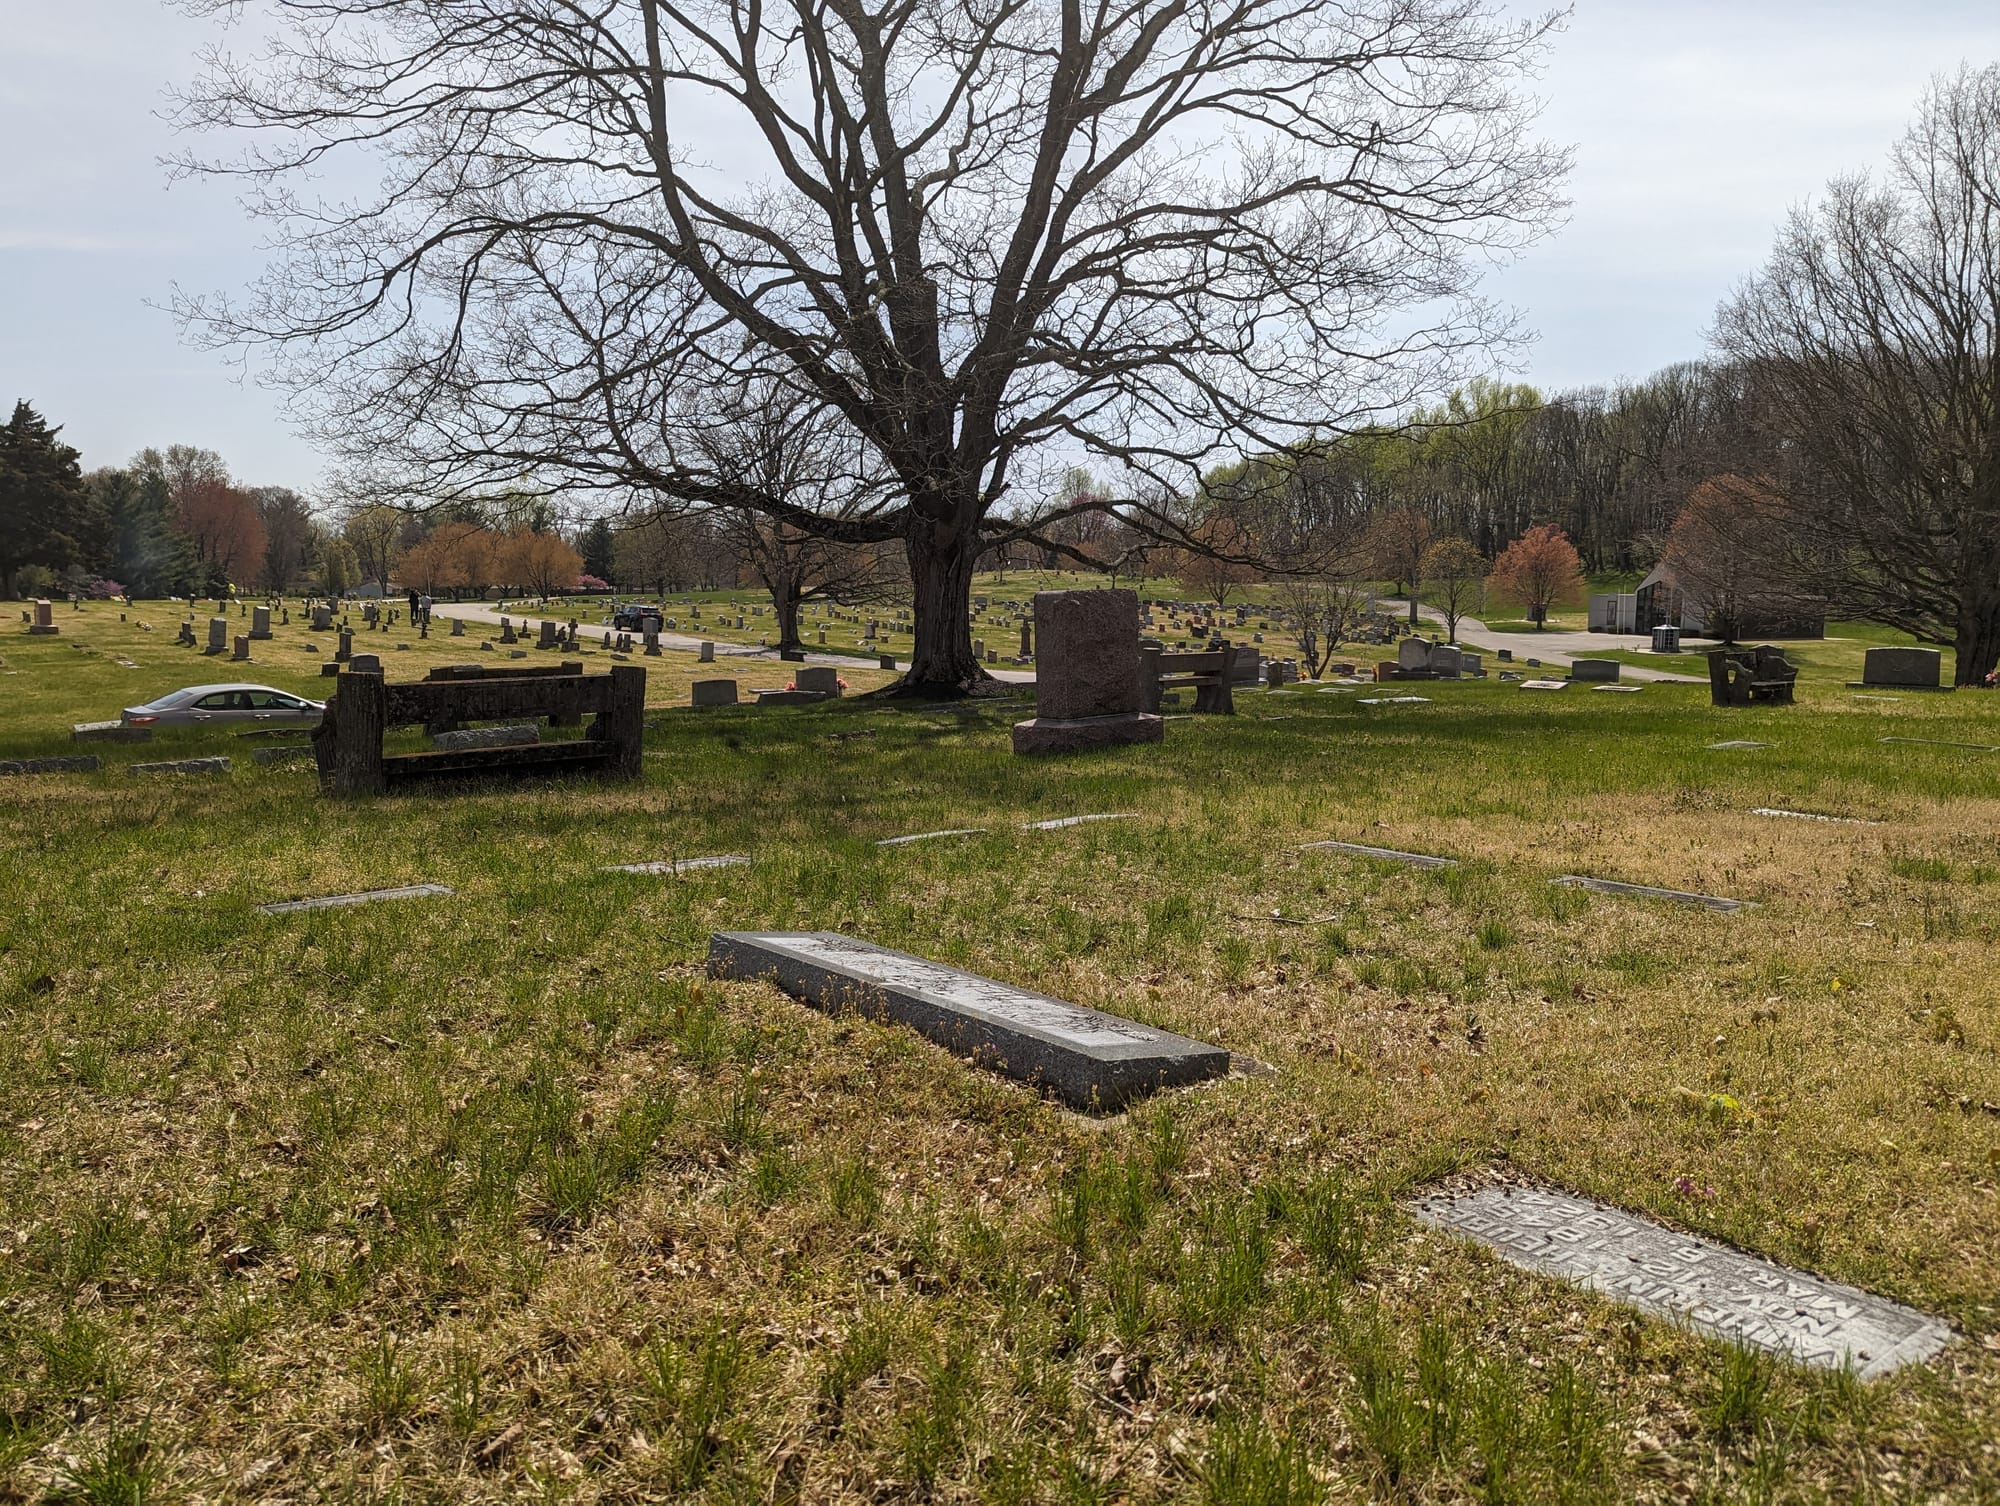 A cemetery seen during daytime